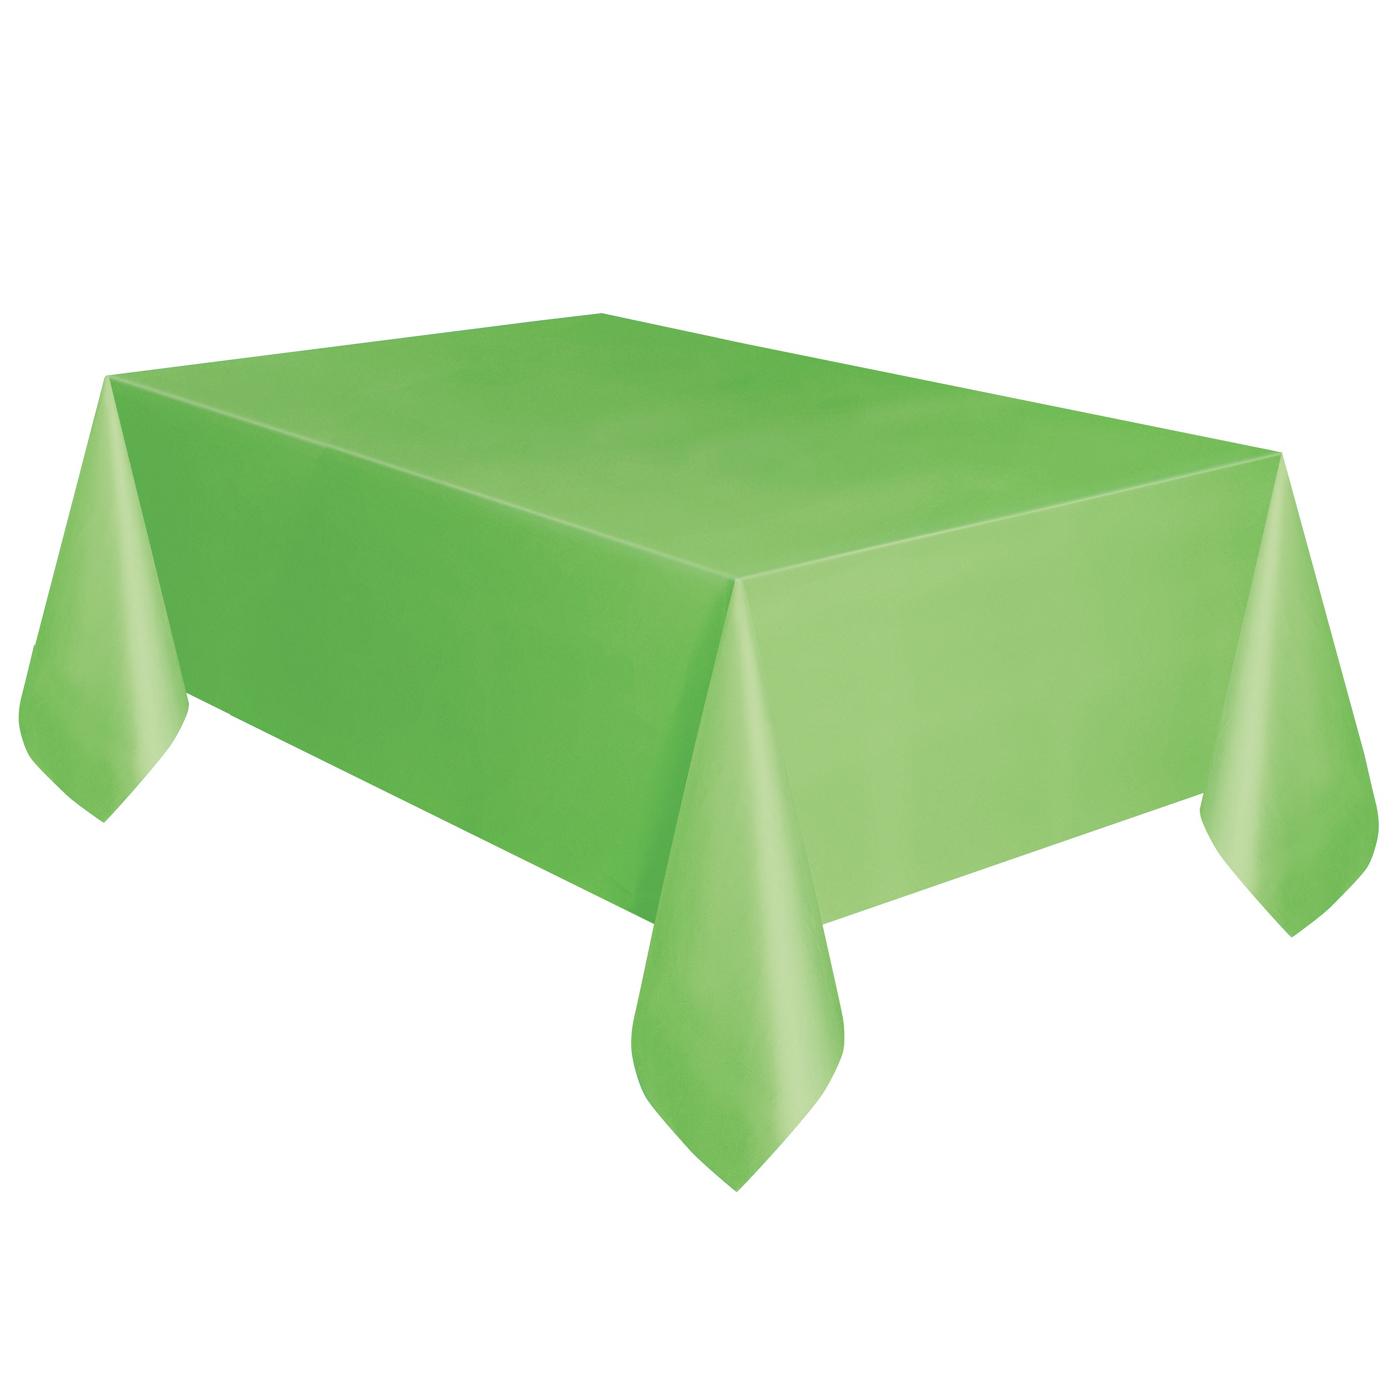 unique Party Plastic Rectanglular Table Cover - Lime Green; image 2 of 2